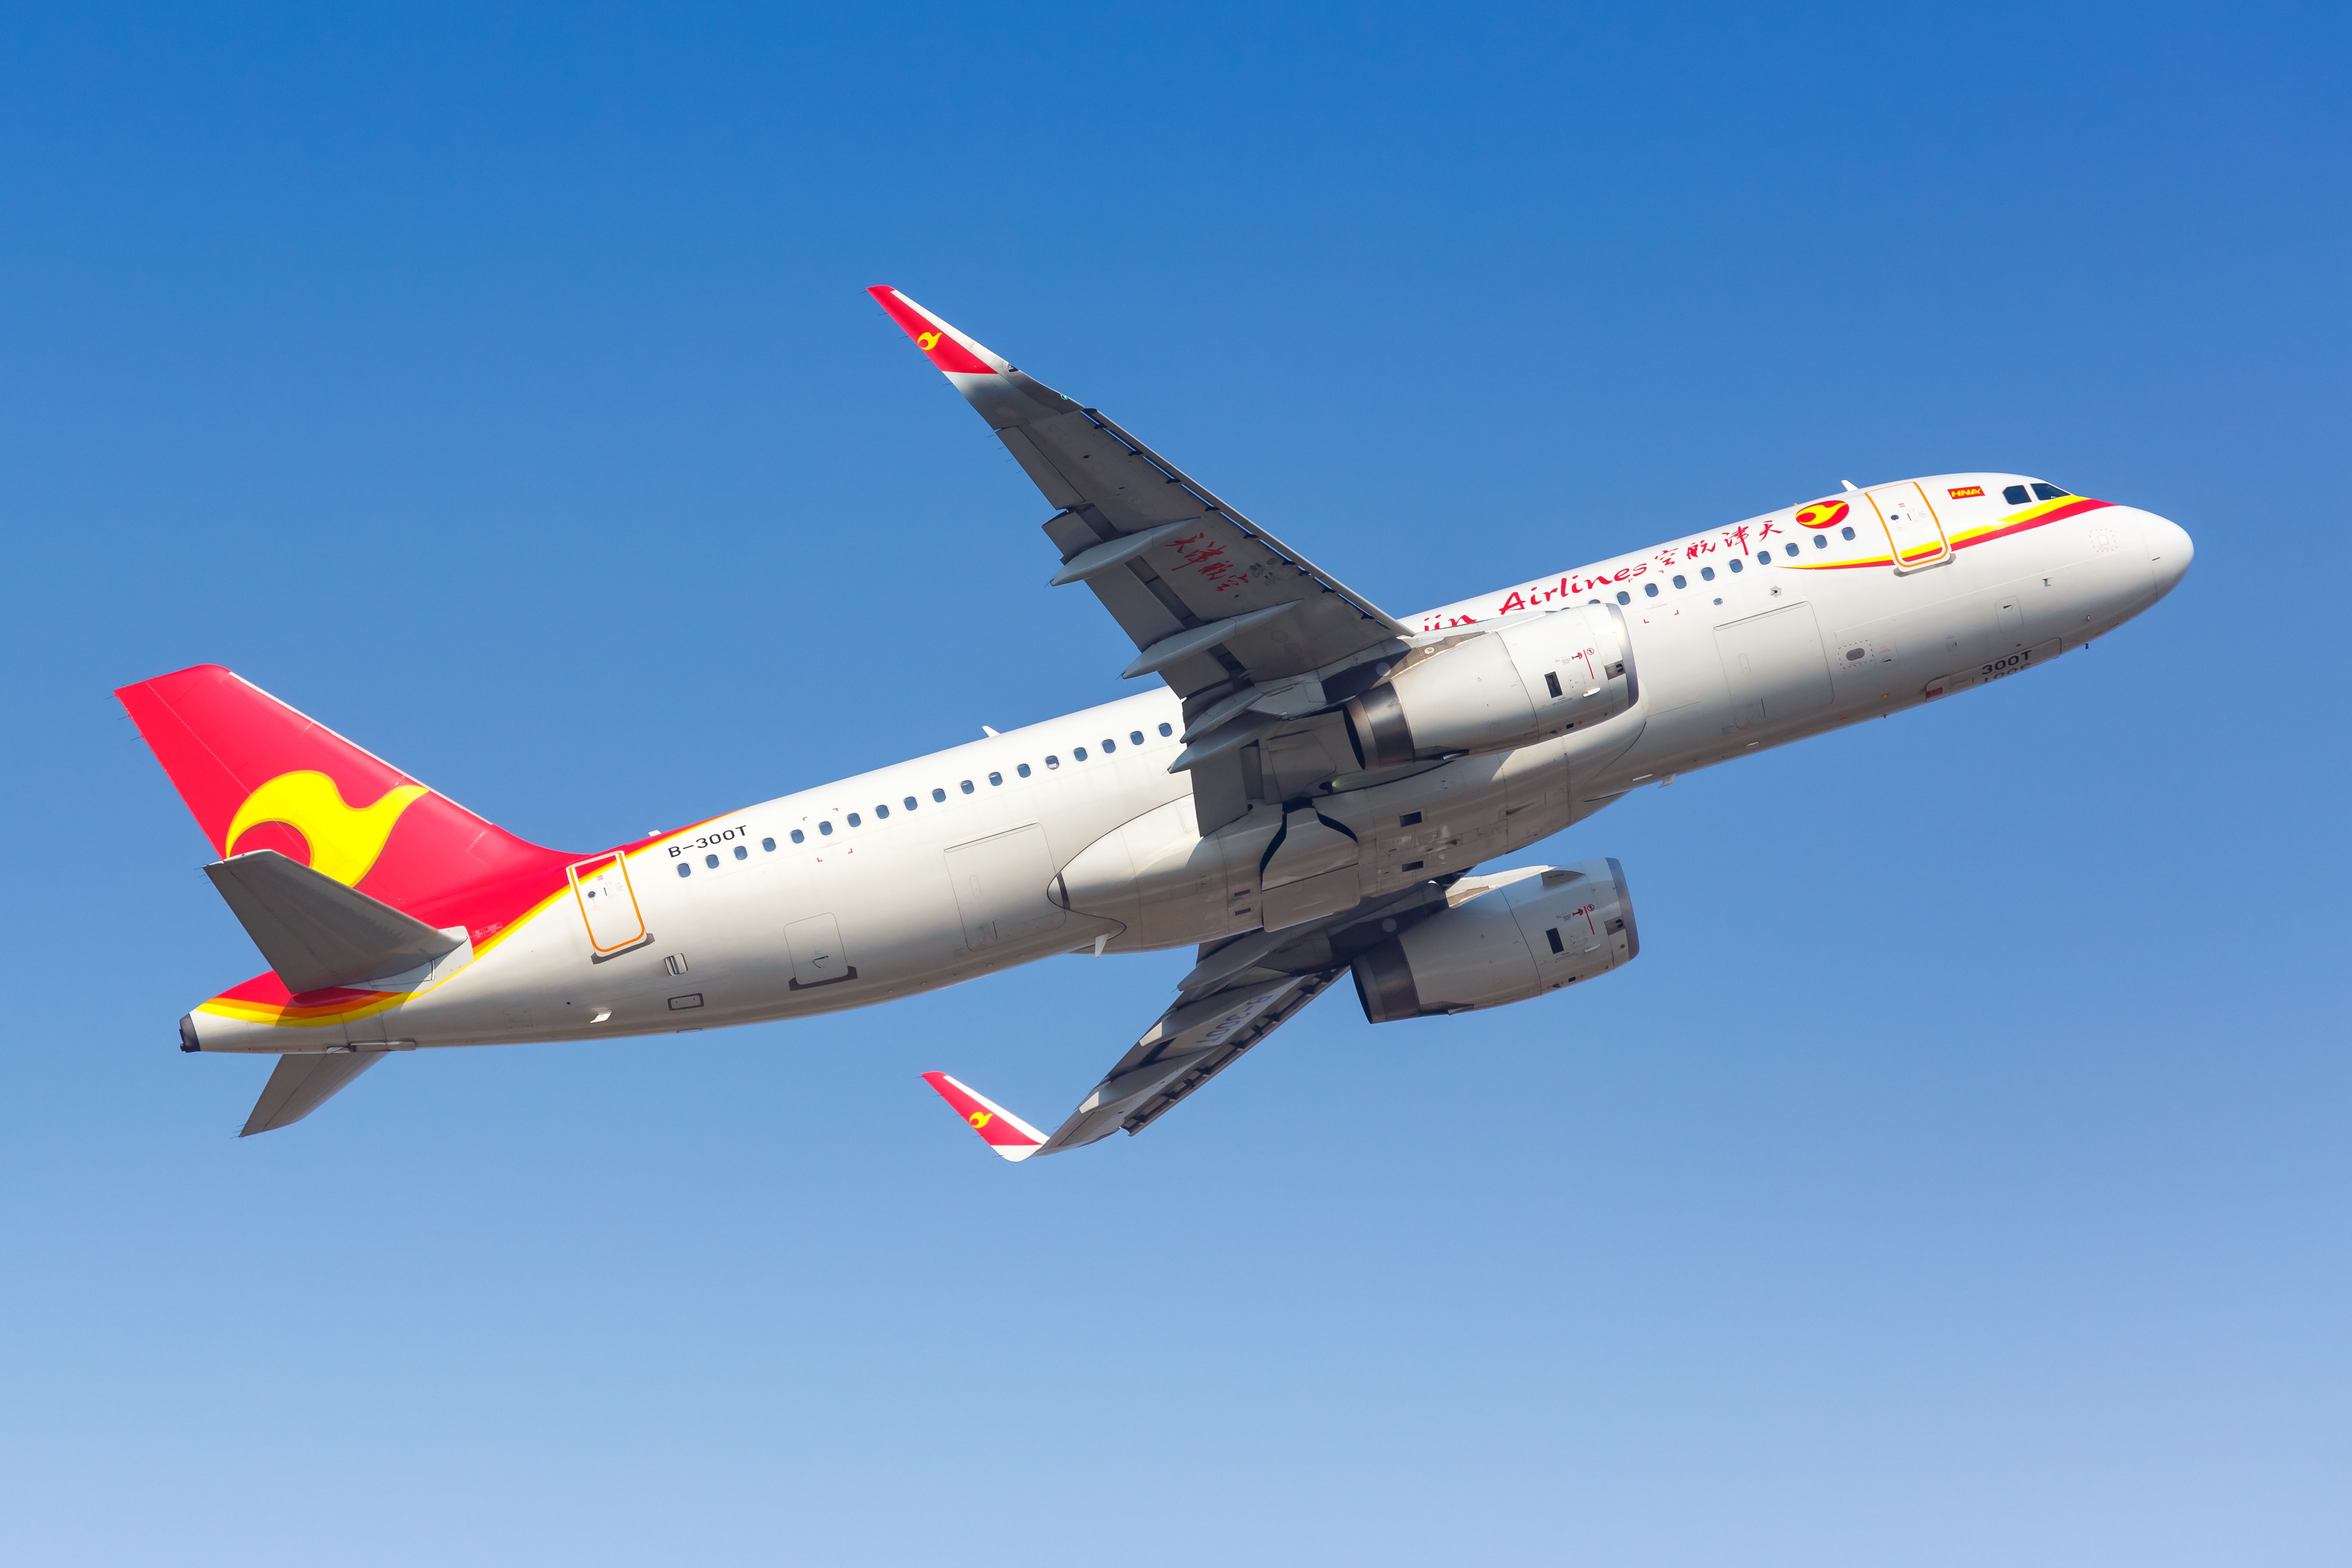 A Tianjin Airlines Airbus A320 flying in the sky.